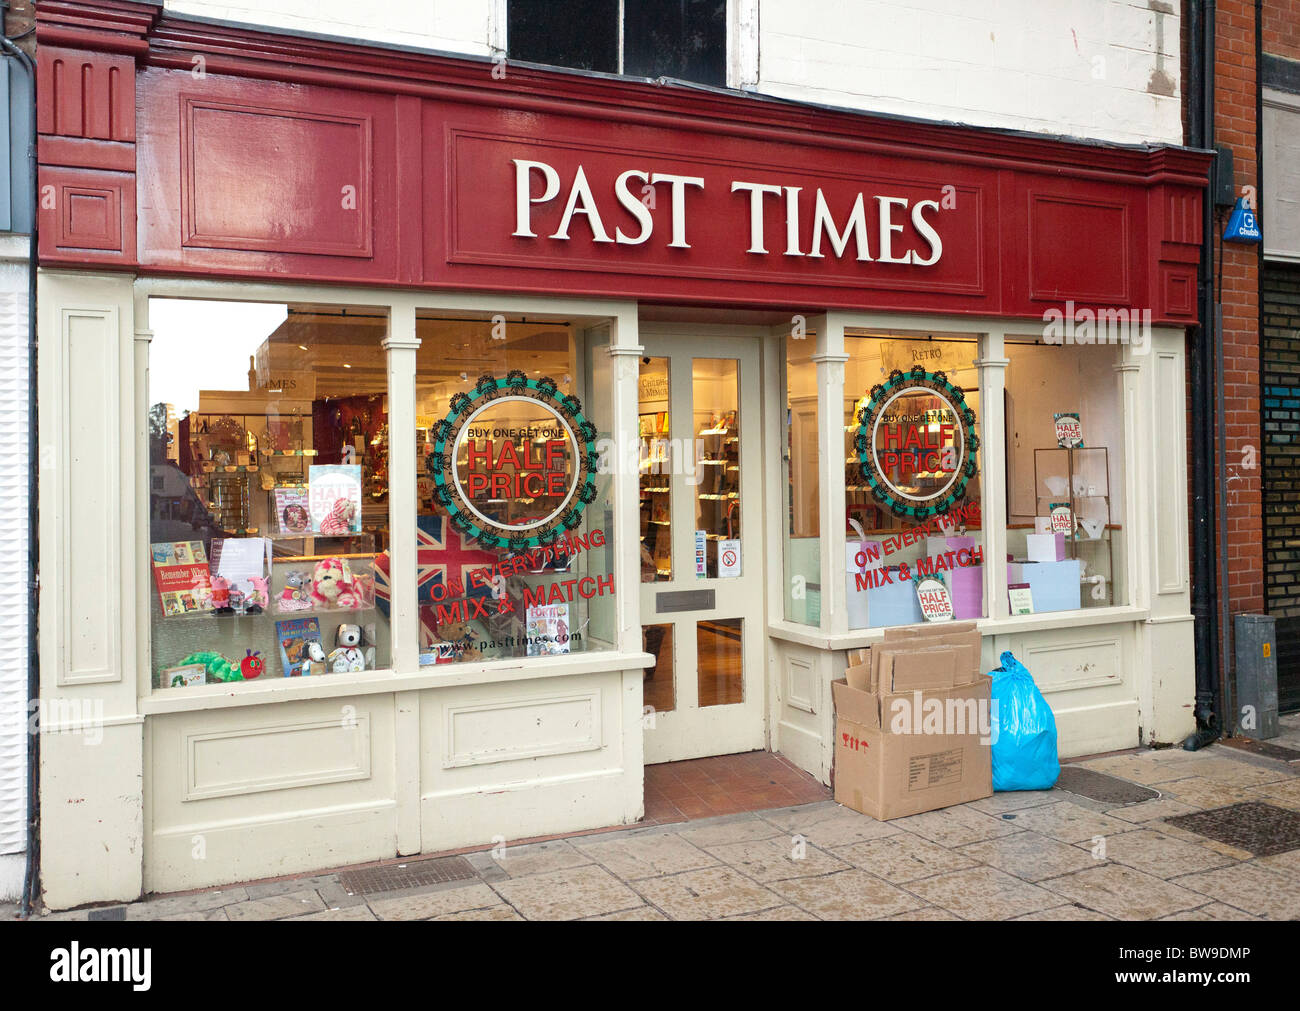 Past Times shop in UK Stock Photo